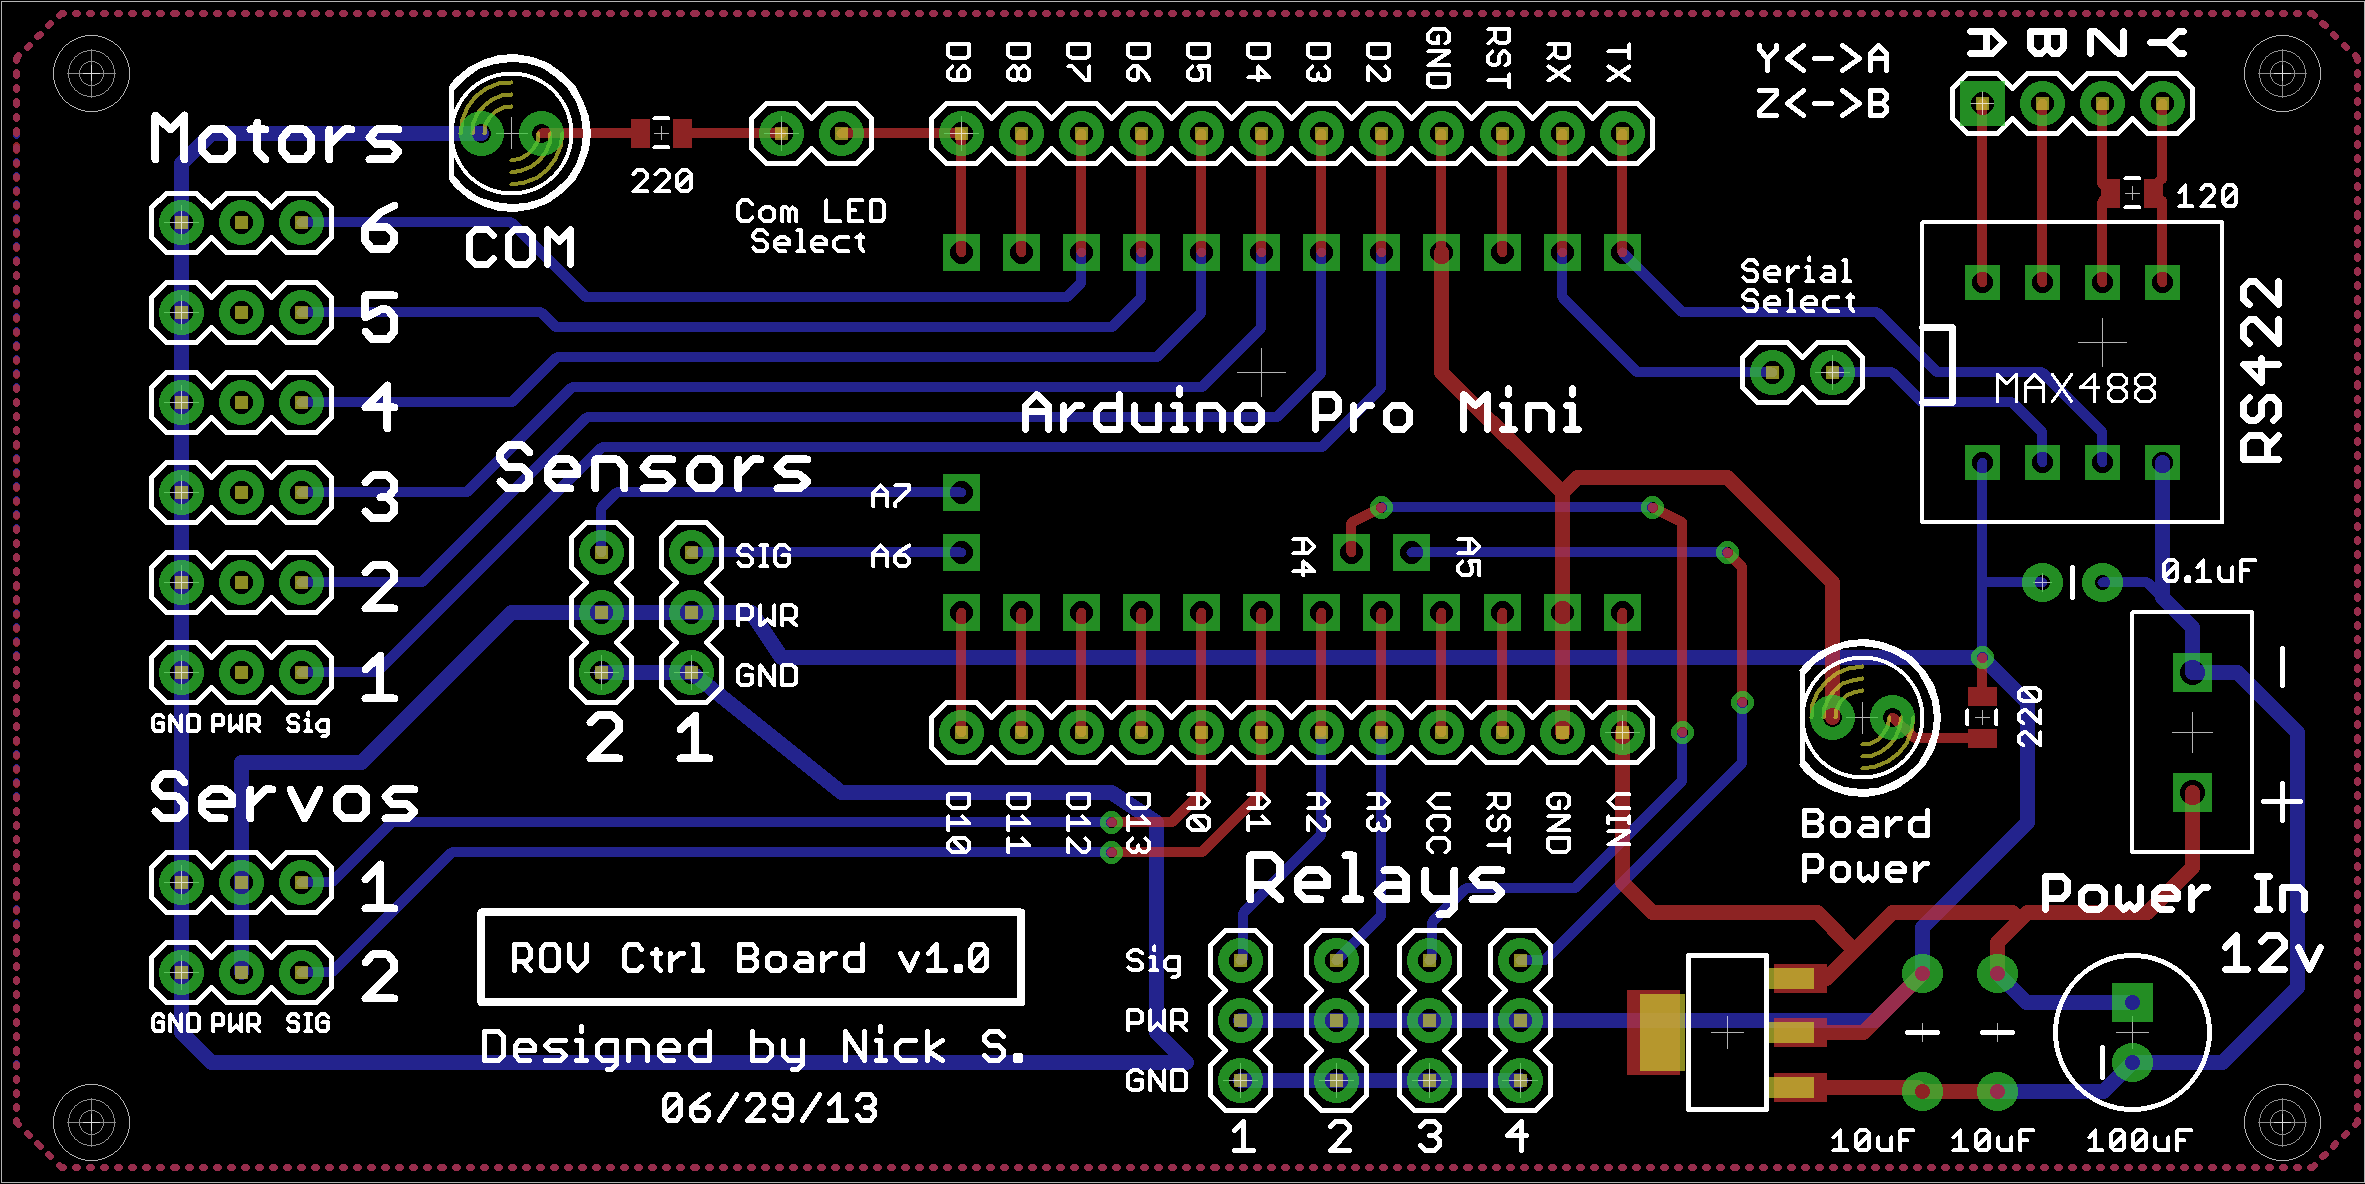 Custom ROV Control Board: Supports up to 6 motors, 2 servos, 2 analog sensors, and 4 relays or 4 analog sensors depending on software configuration.